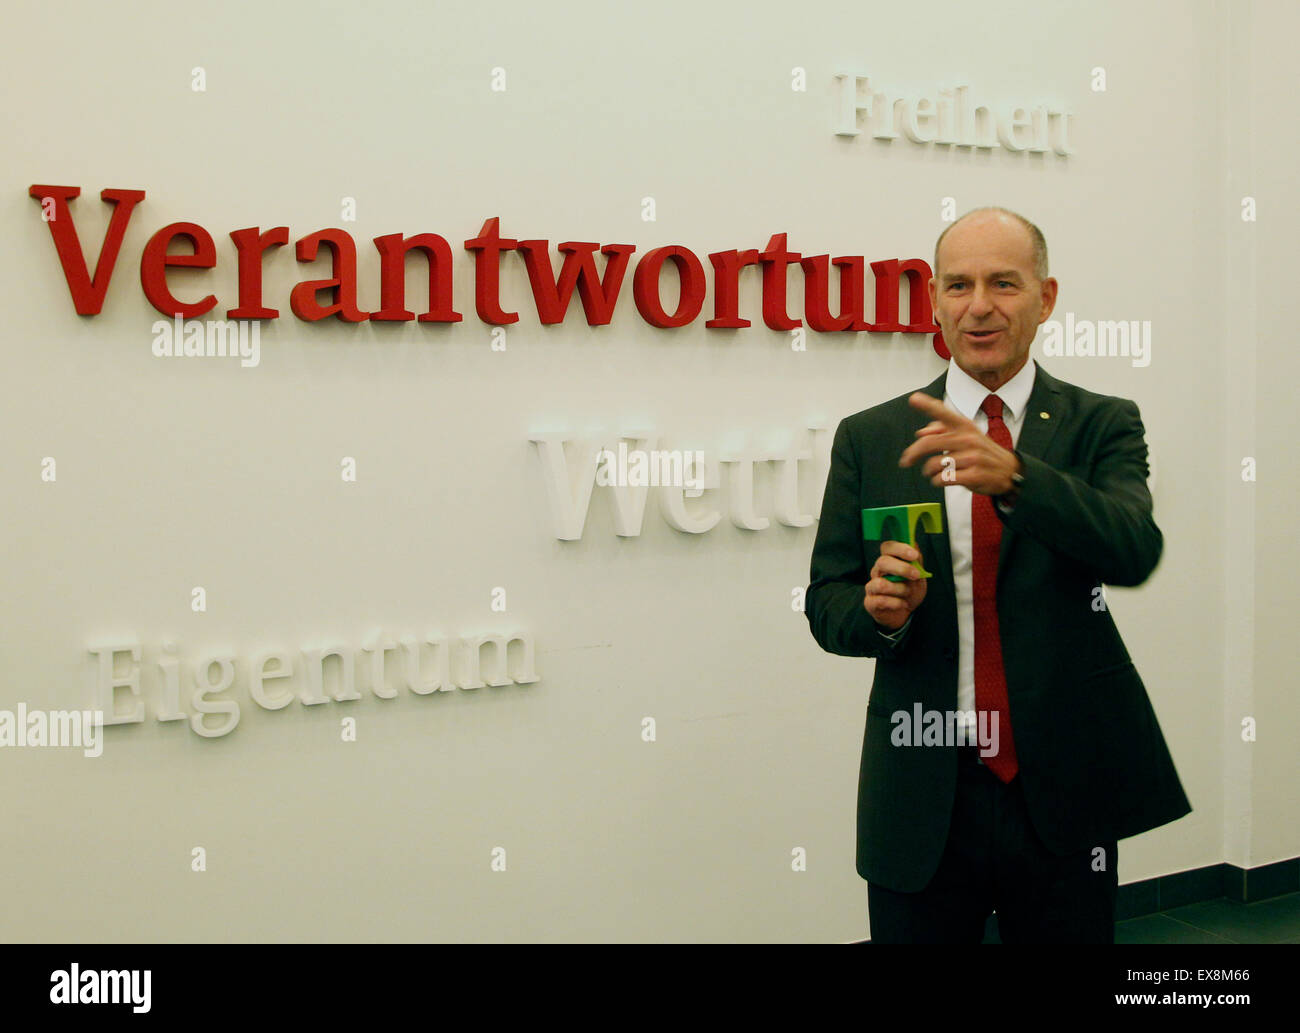 Karl-Erivan Haub, CEO of Tengelmann Group, stands in front of a wall with terms that read 'Verantwortung, Eigentum, Freiheit und Wettbewerb' (lit. responsibility, property, freedom and competition) prior to a press conference in Muelheim an der Ruhr, Germany, 09 July 2015. The corporation currently employs around 72,000 people in Germany and 18 other countries. PHOTO: ROLAND WEIHRAUCH/dpa Stock Photo